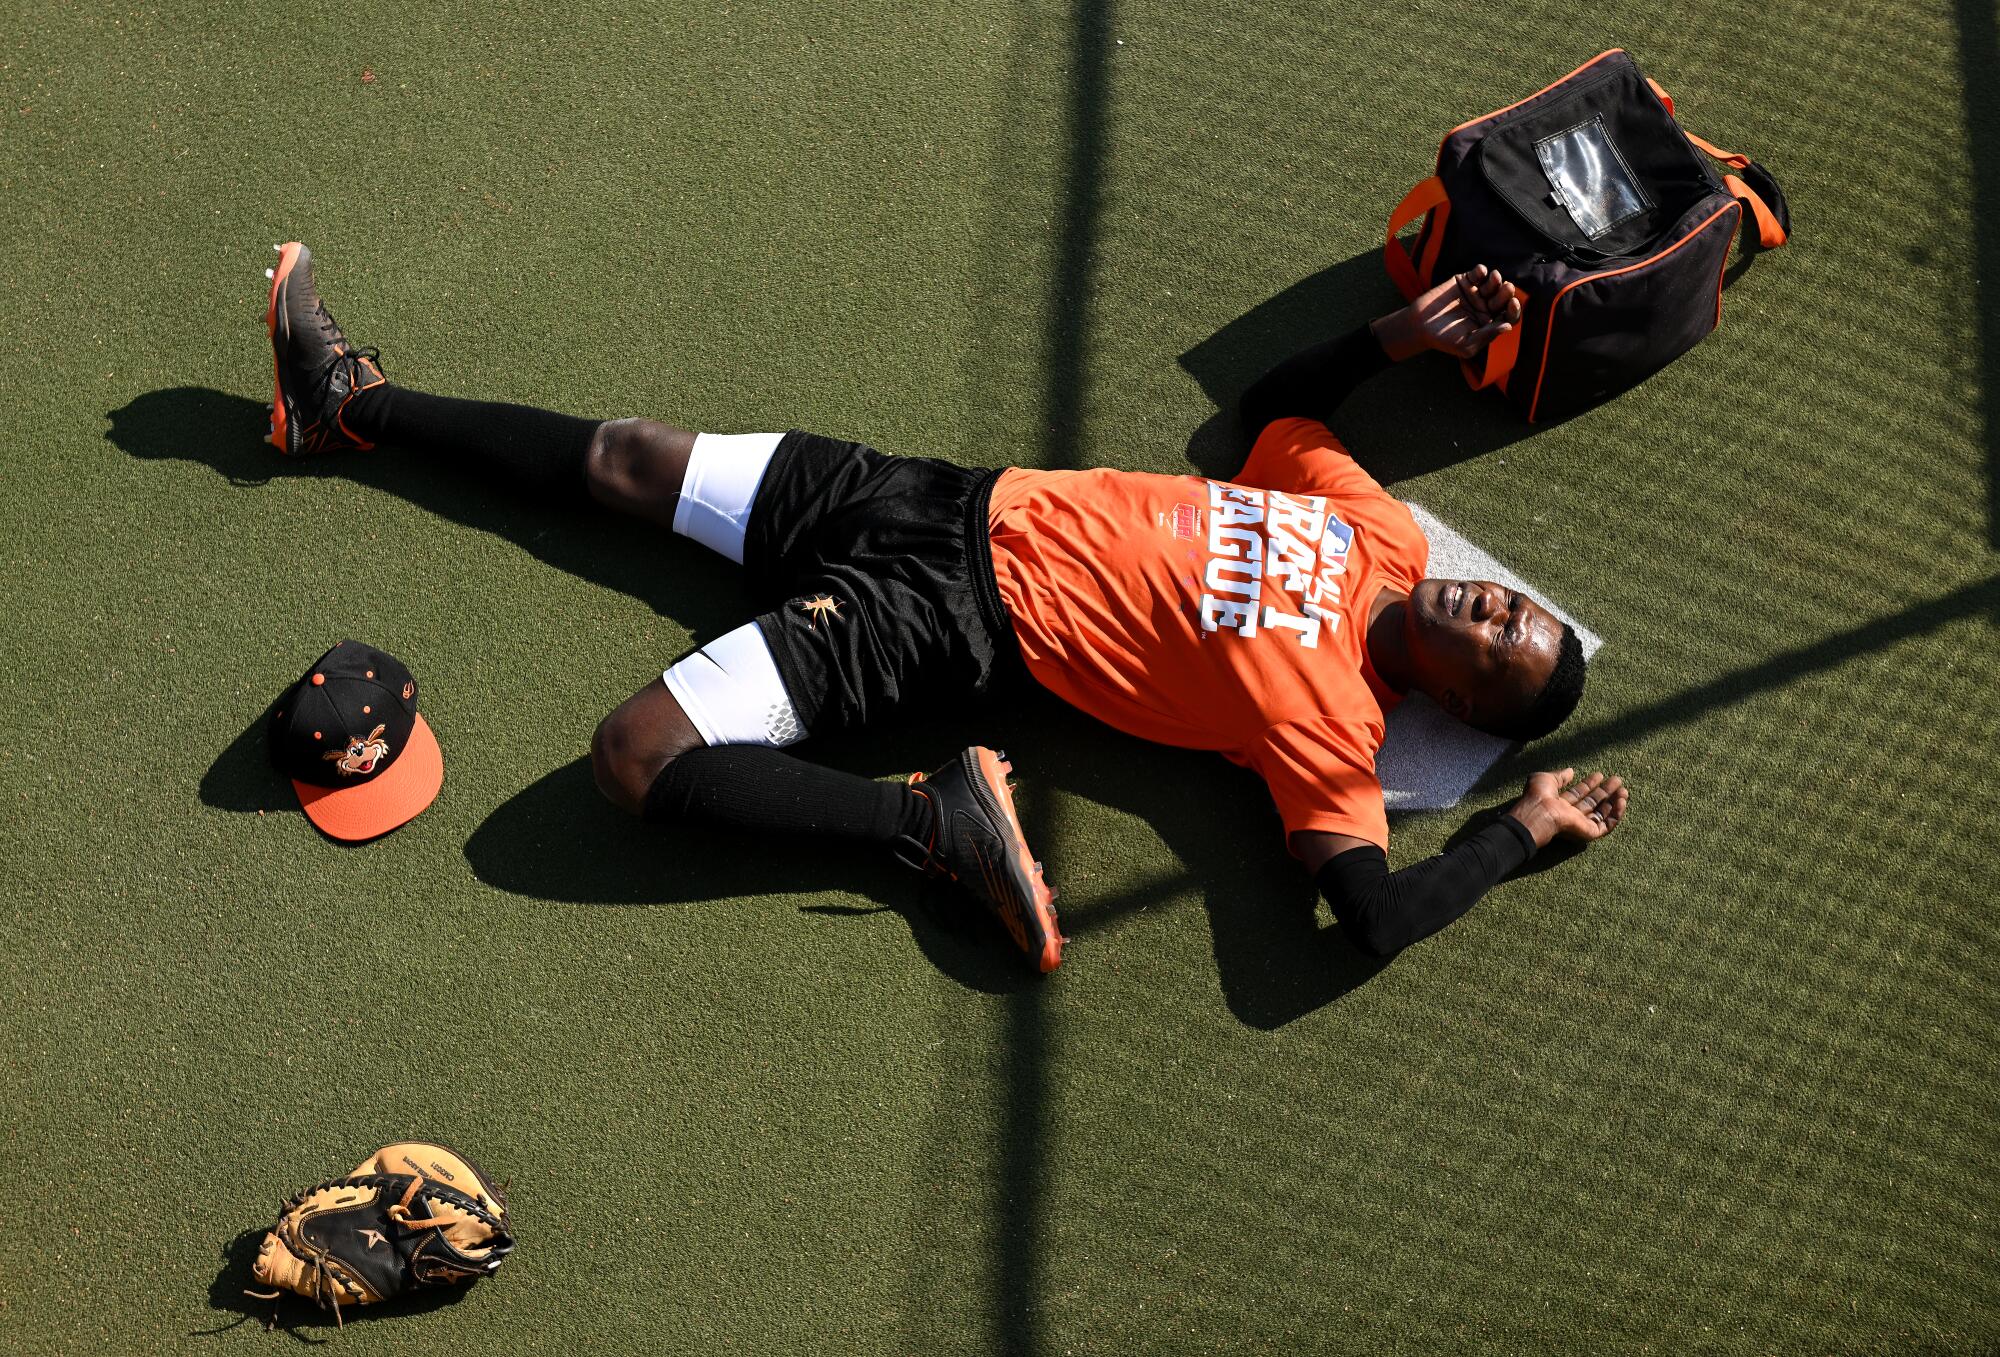 Frederick Keys player Dennis Kasumba stretches before a game with the Trenton Thunder.